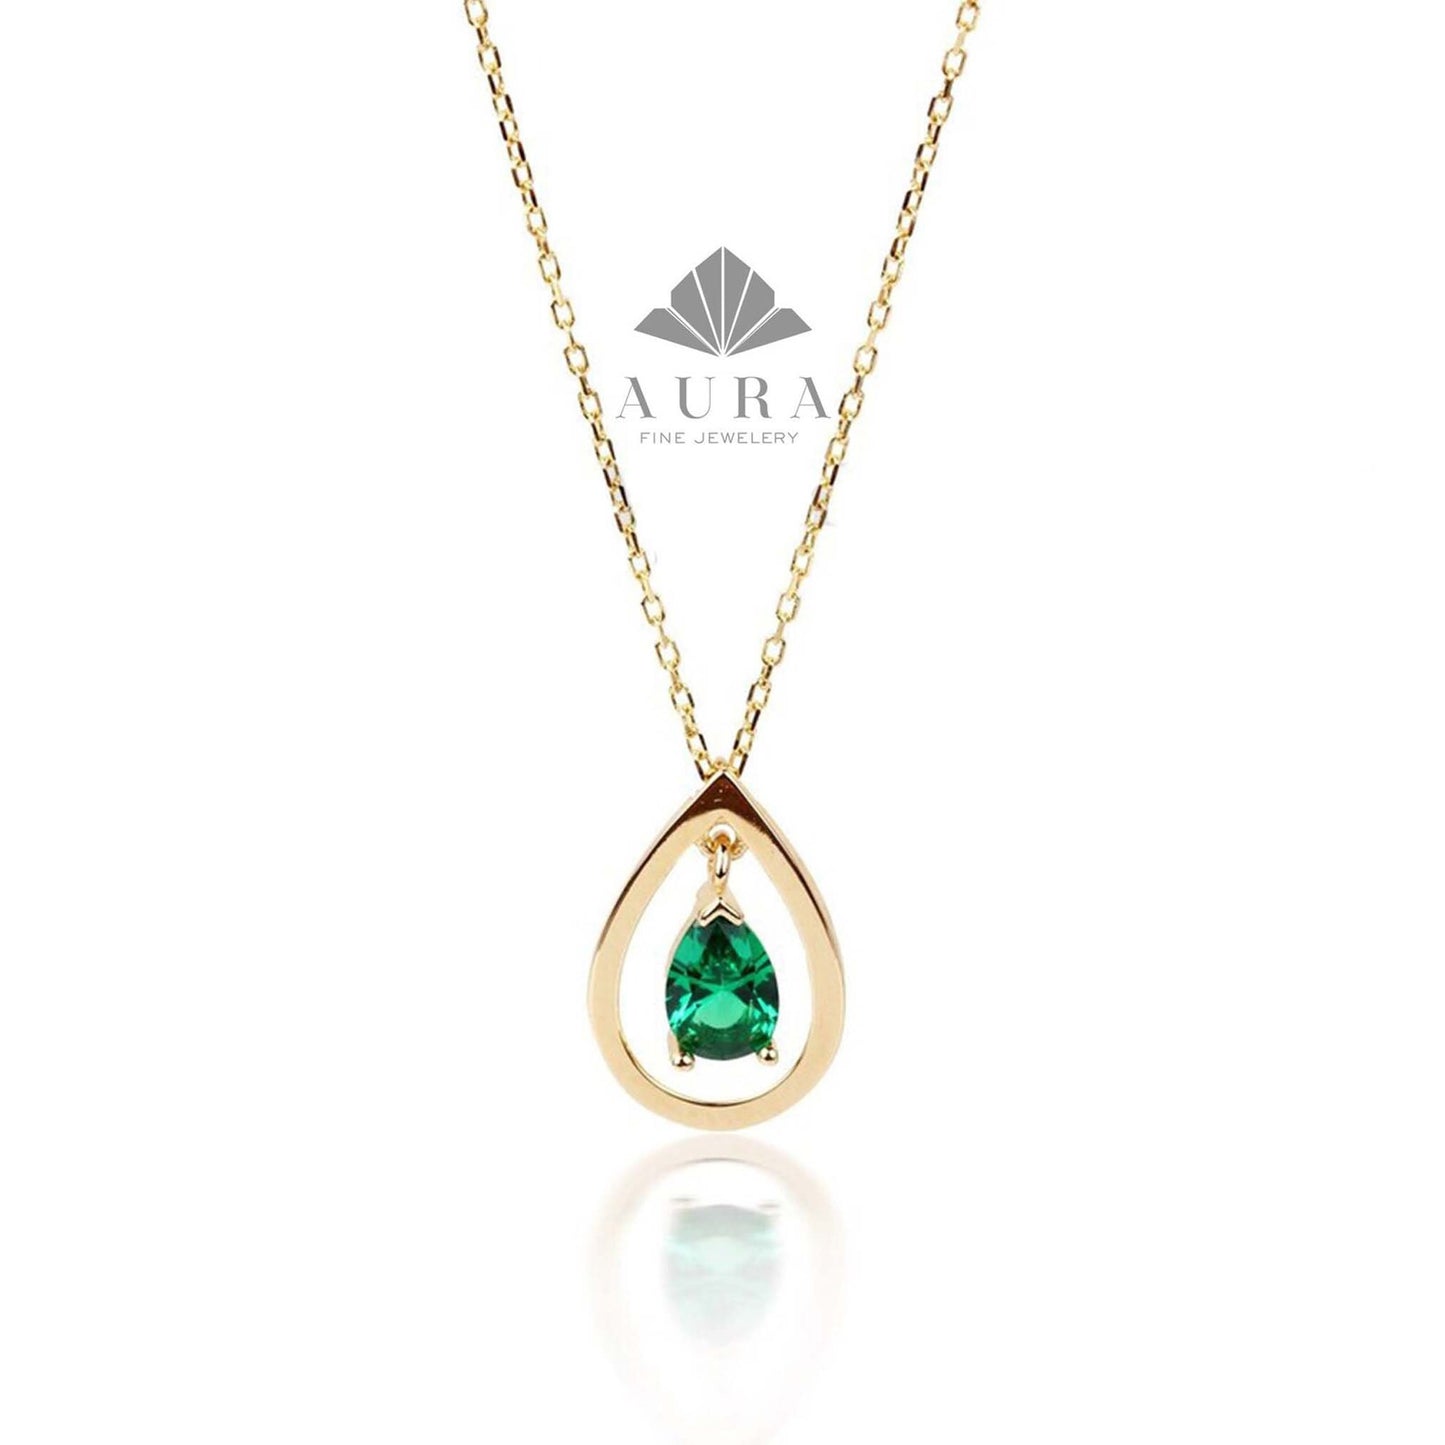 14K Gold Emerald Necklace, Emerald Pendant, Pear Shape Emerald Solitaire Drop Necklace, May Birthstone, Gemstone Jewelry, Gift For Her